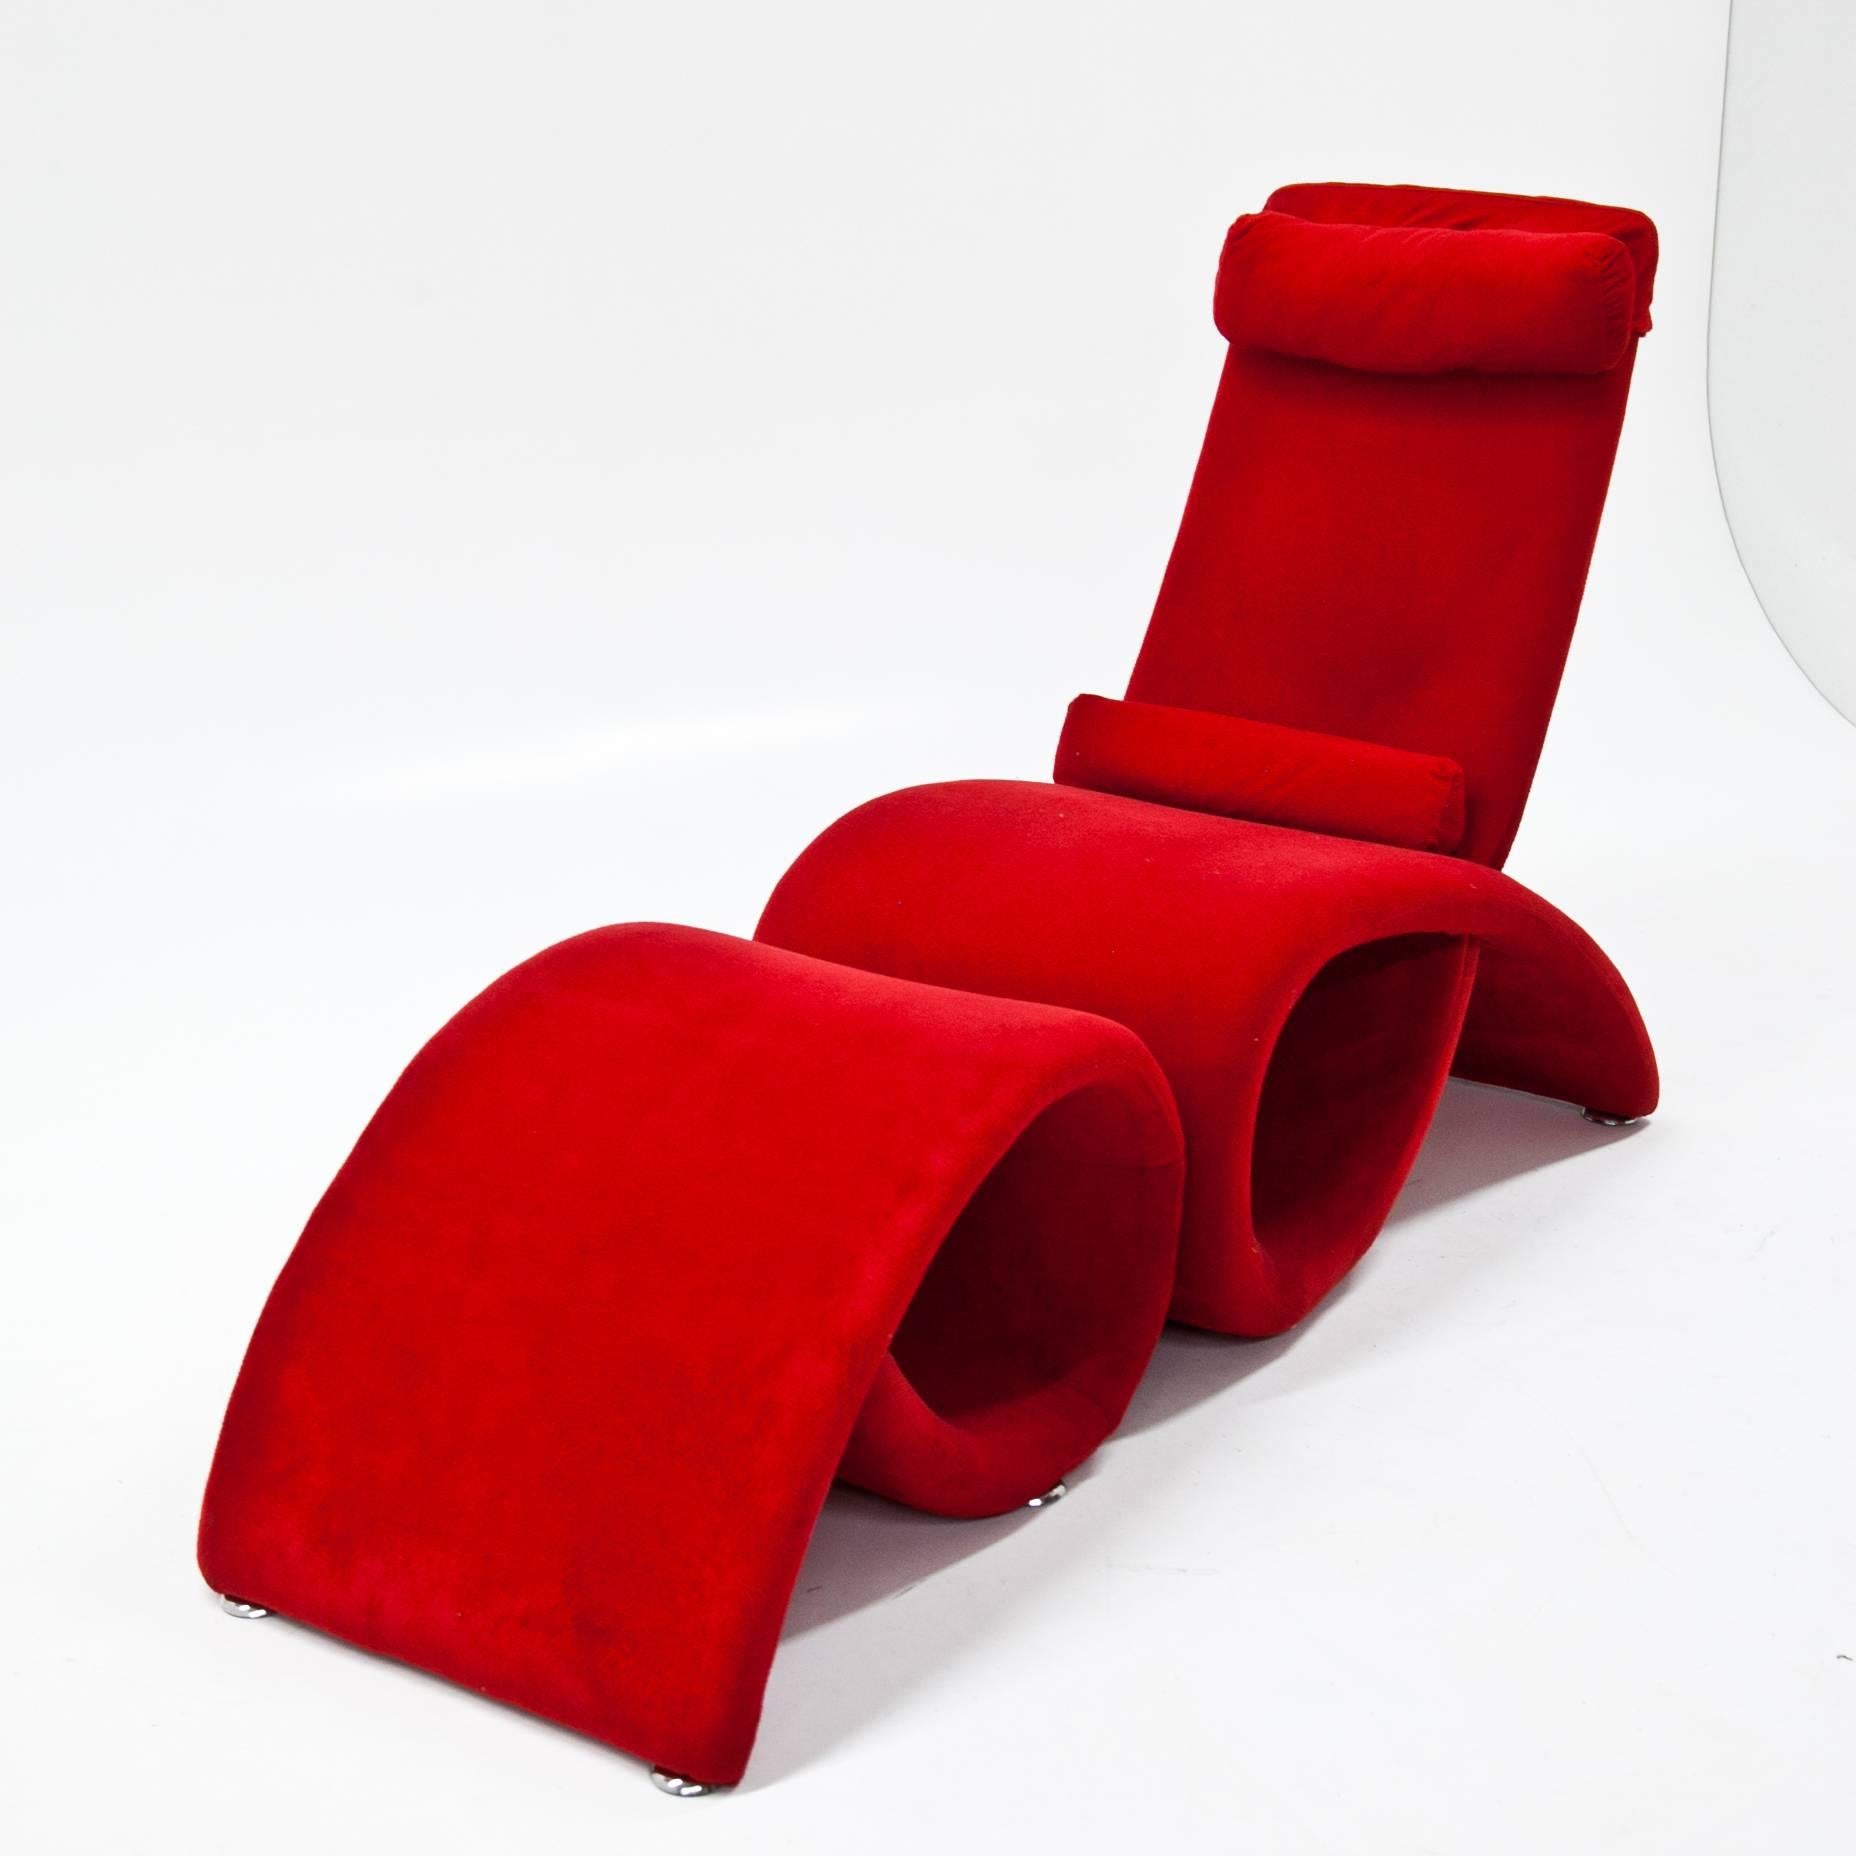 Modern Red Lounge Chair, 20th Century